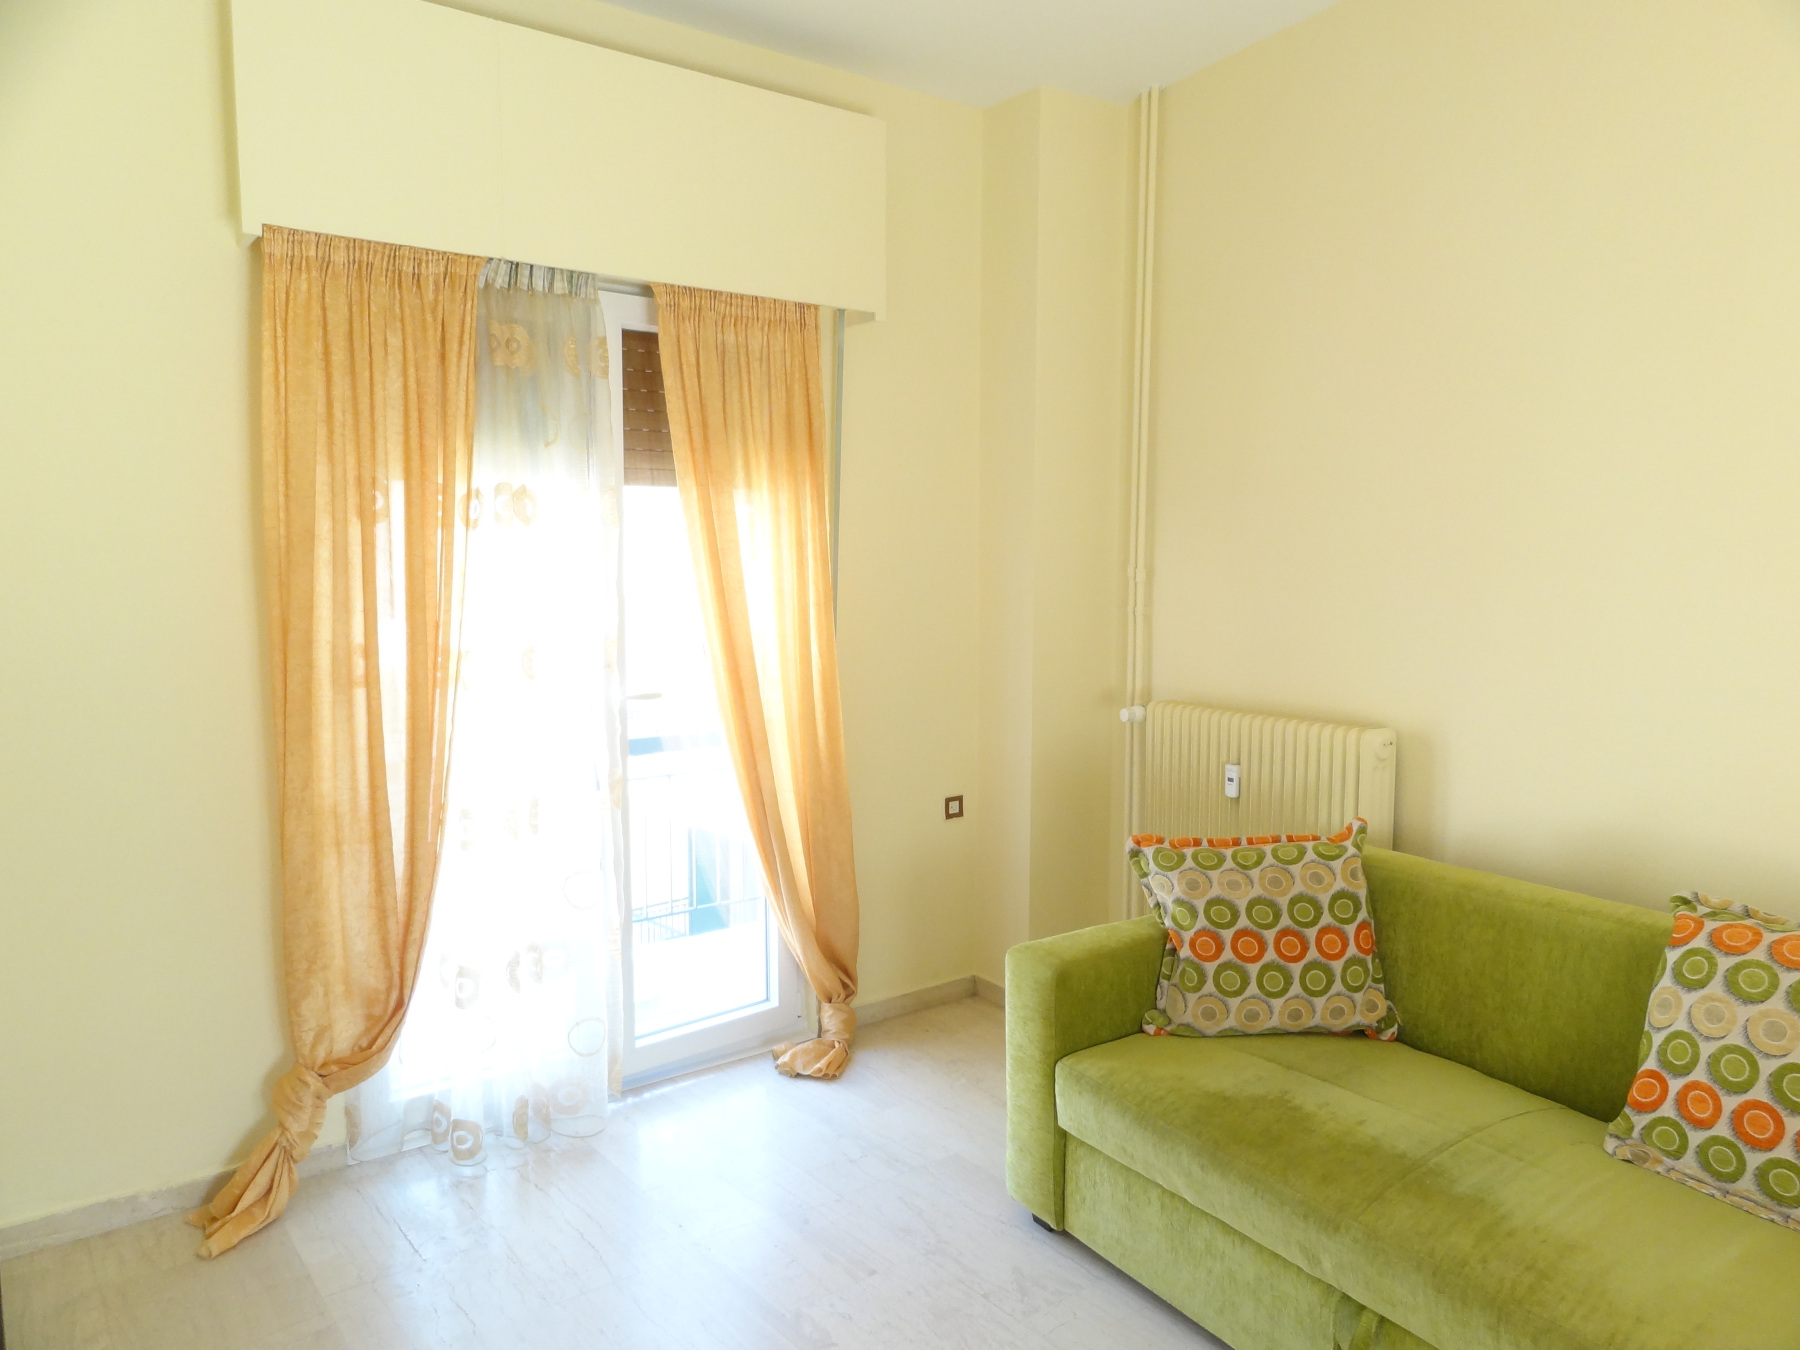 1 bedroom apartment for rent, 47 sq.m. 2nd floor in the area of ​​the nursing home in Ioannina